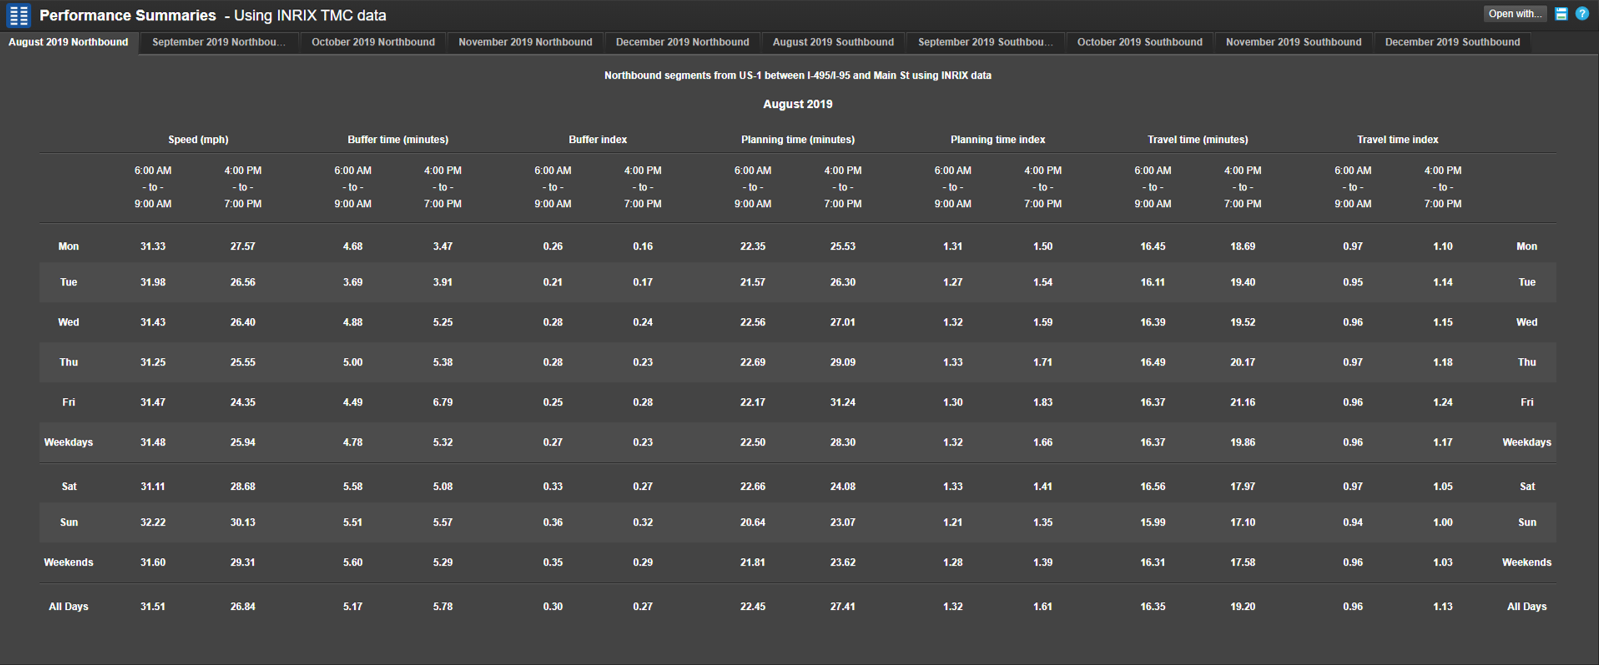 Screenshot of a data table showing Performance Summaries results